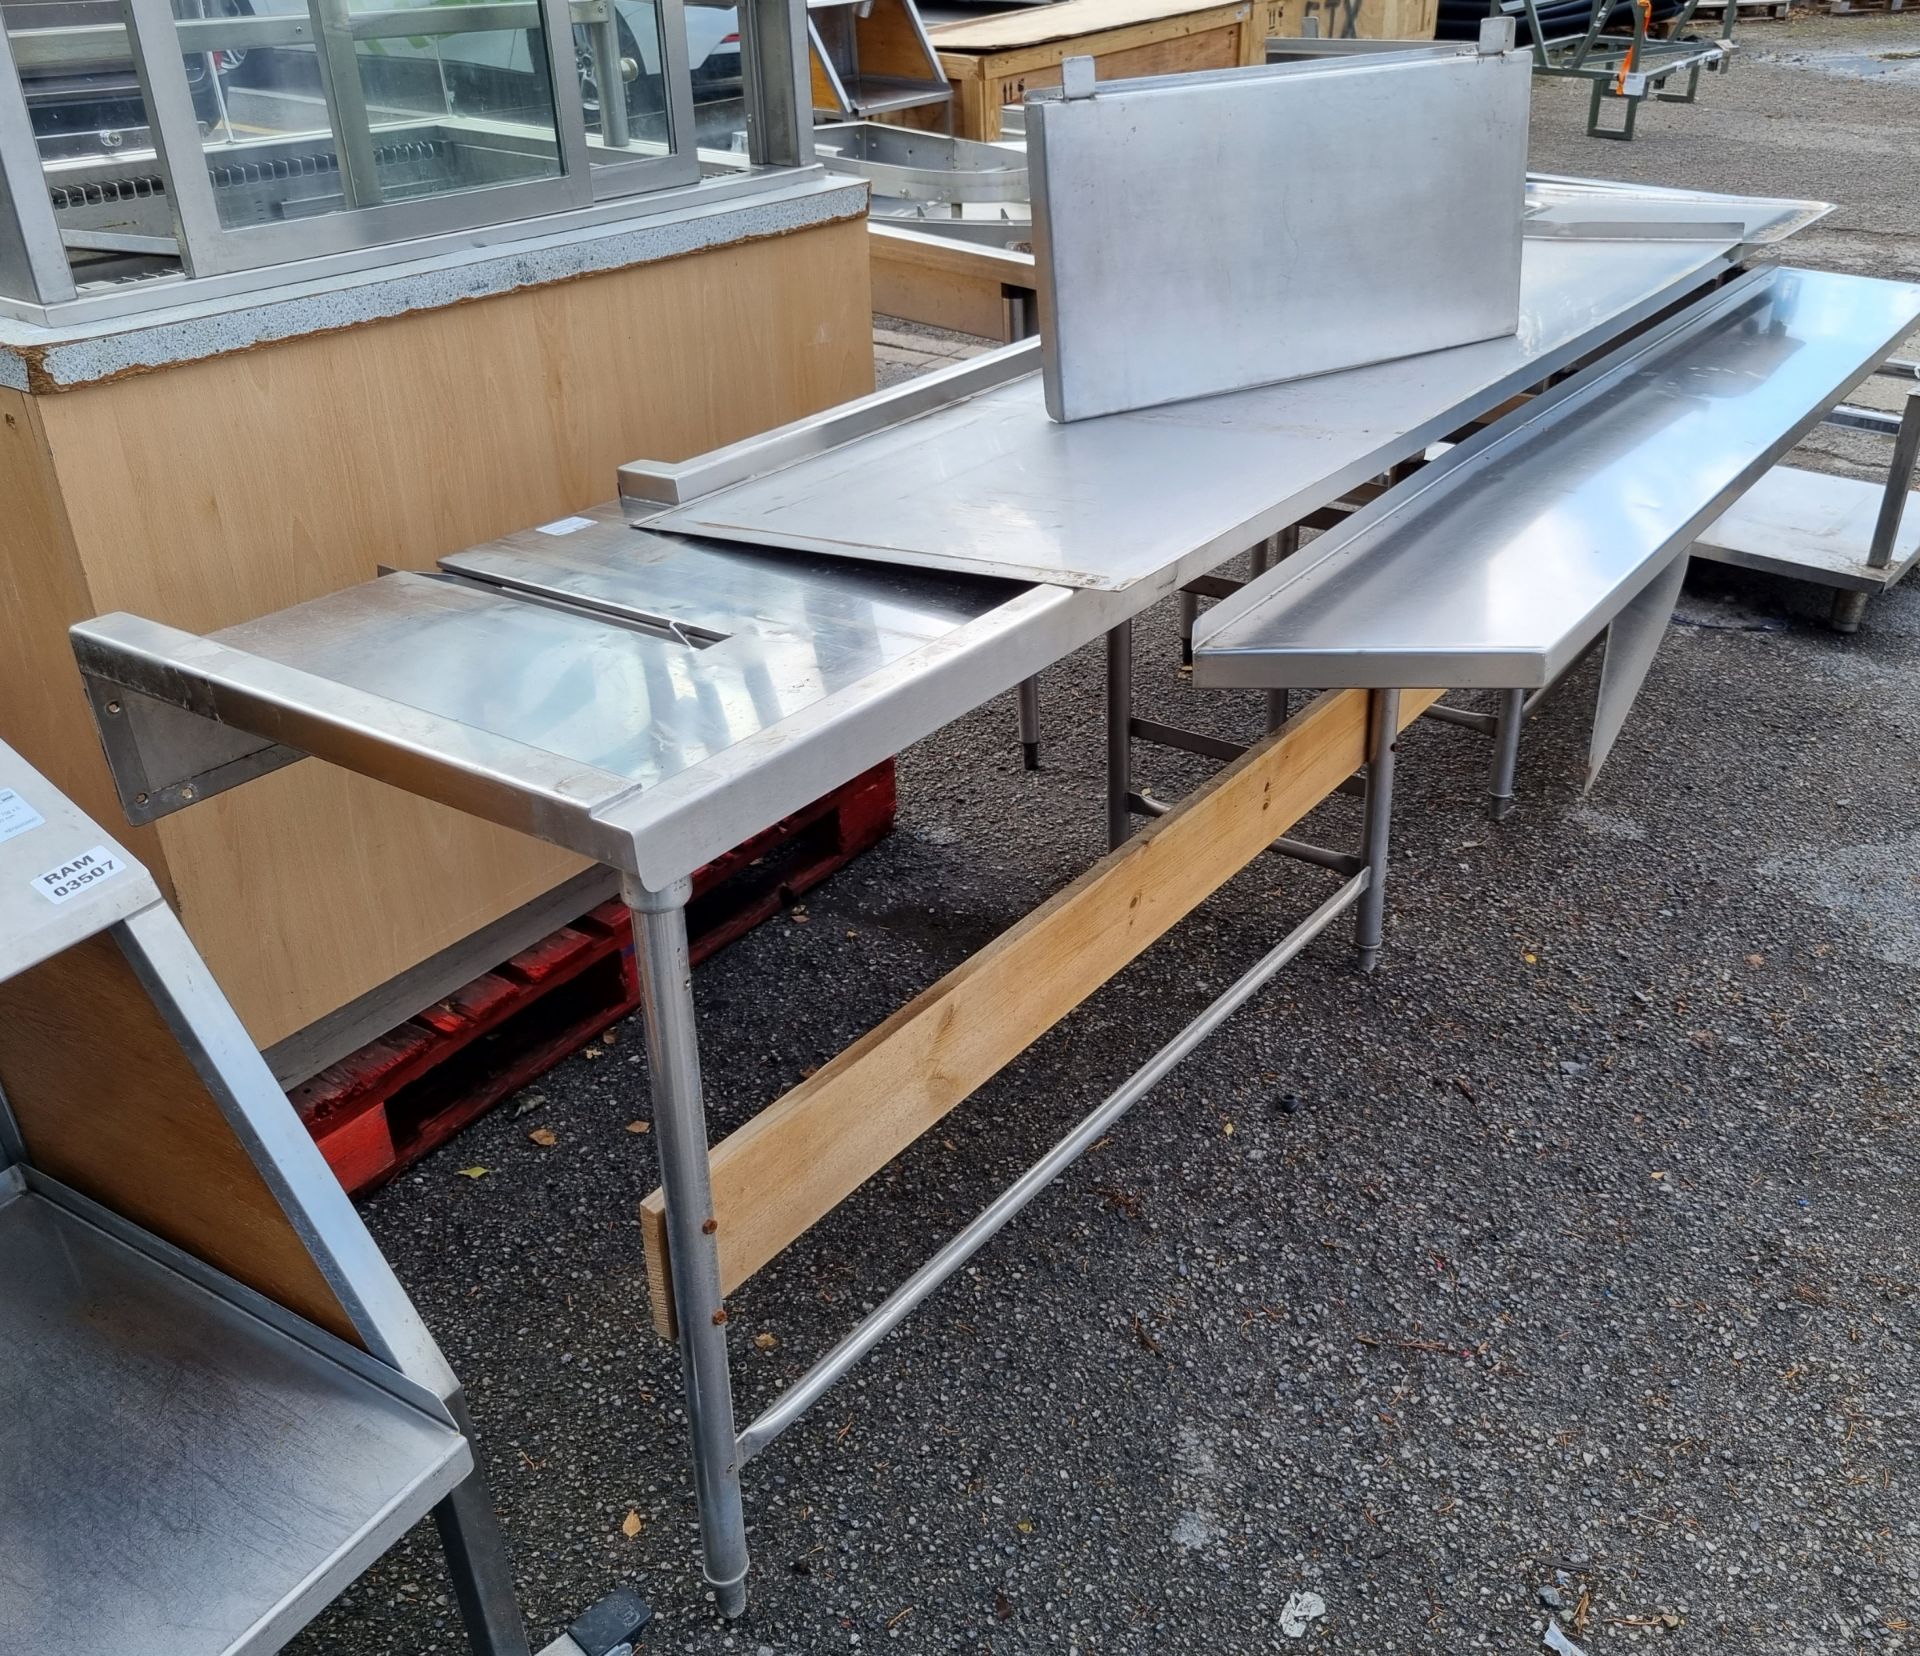 Stainless steel counter top unit with racking - W 3040 x D 900 x H 920mm - Image 3 of 5